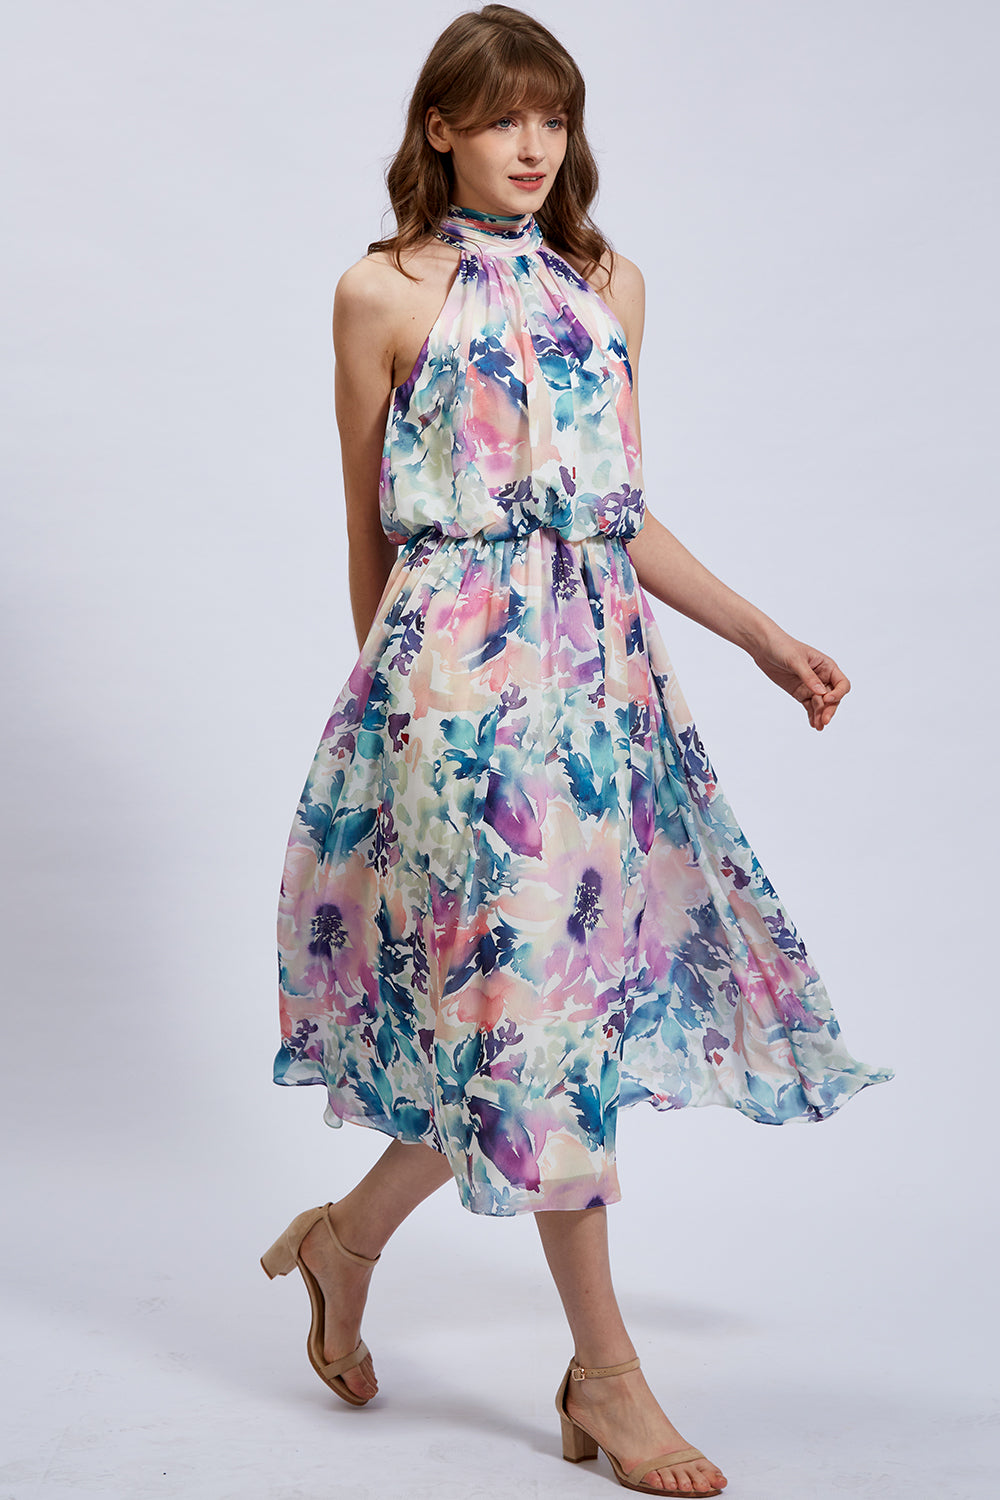 Halter High Neck Flowy Chiffon Cocktail Formal Party Dress